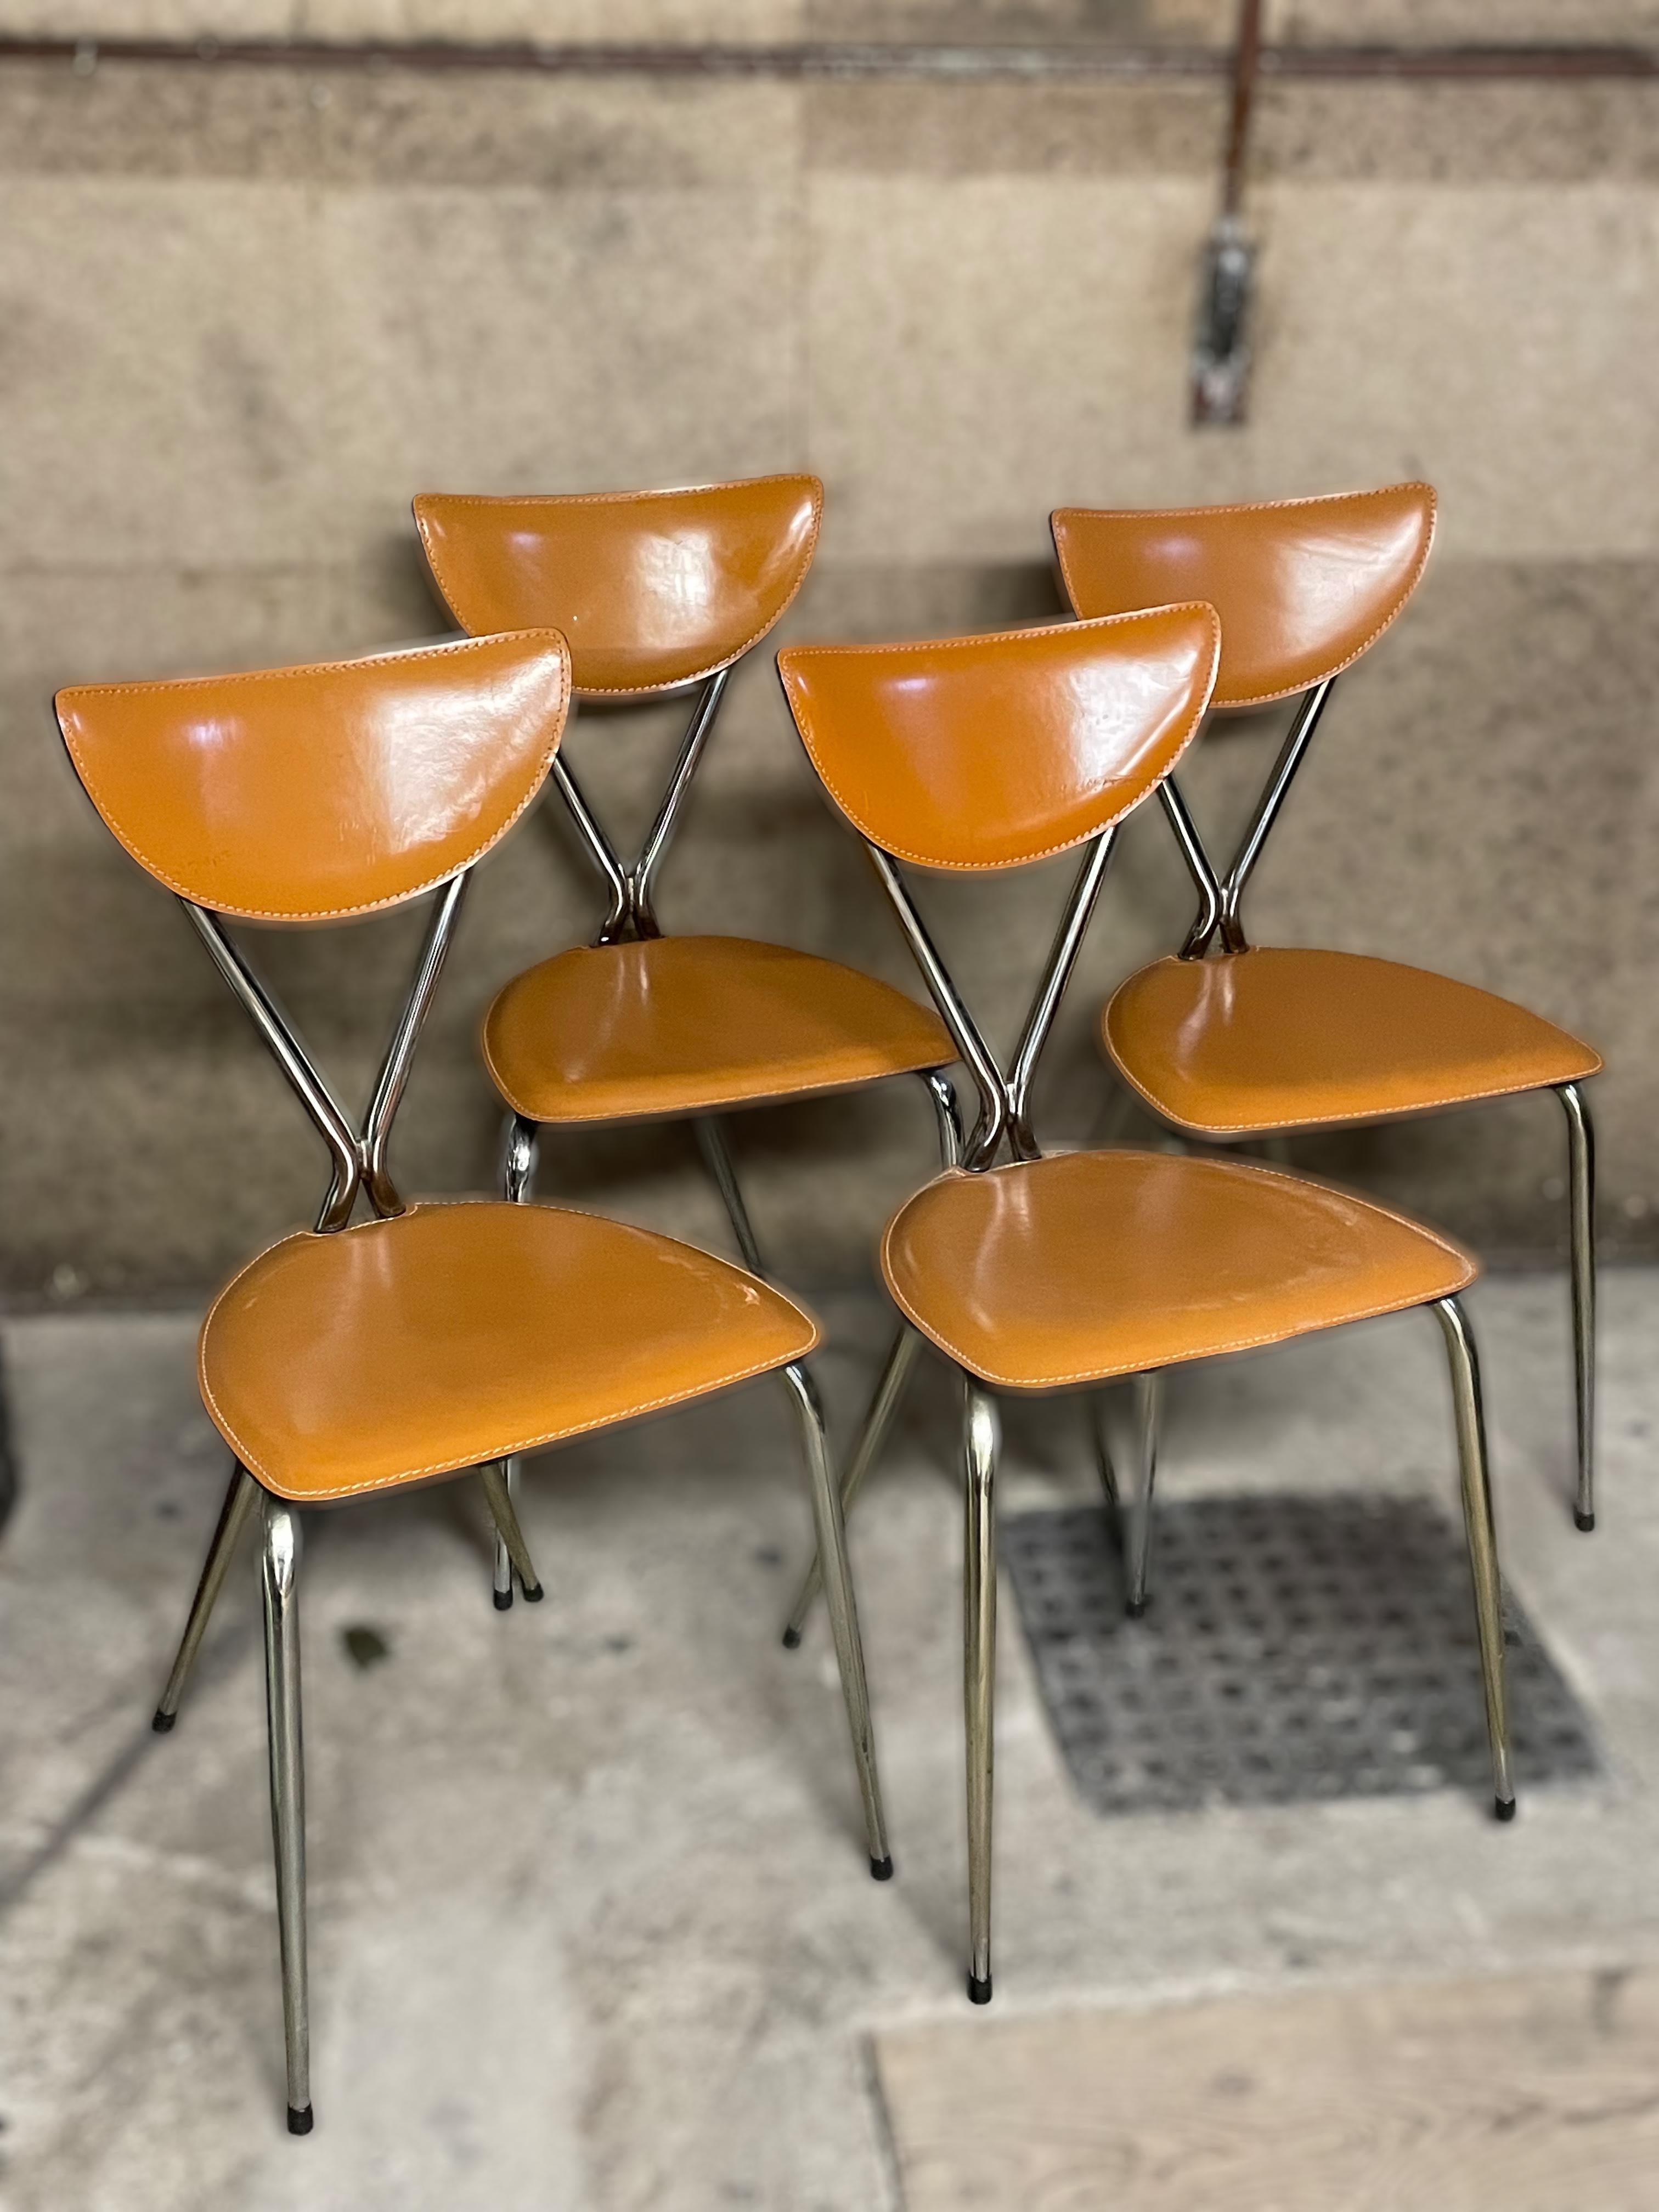 A gorgeous set of four ‘Stiletto’ dining chairs. It is the Arrben Modell Bernardina in Tan or Cognac Leather. Marked with manufactory mark. In used and still very good condition. A nice addition to your Kitchen or Dining Room. Please see all the